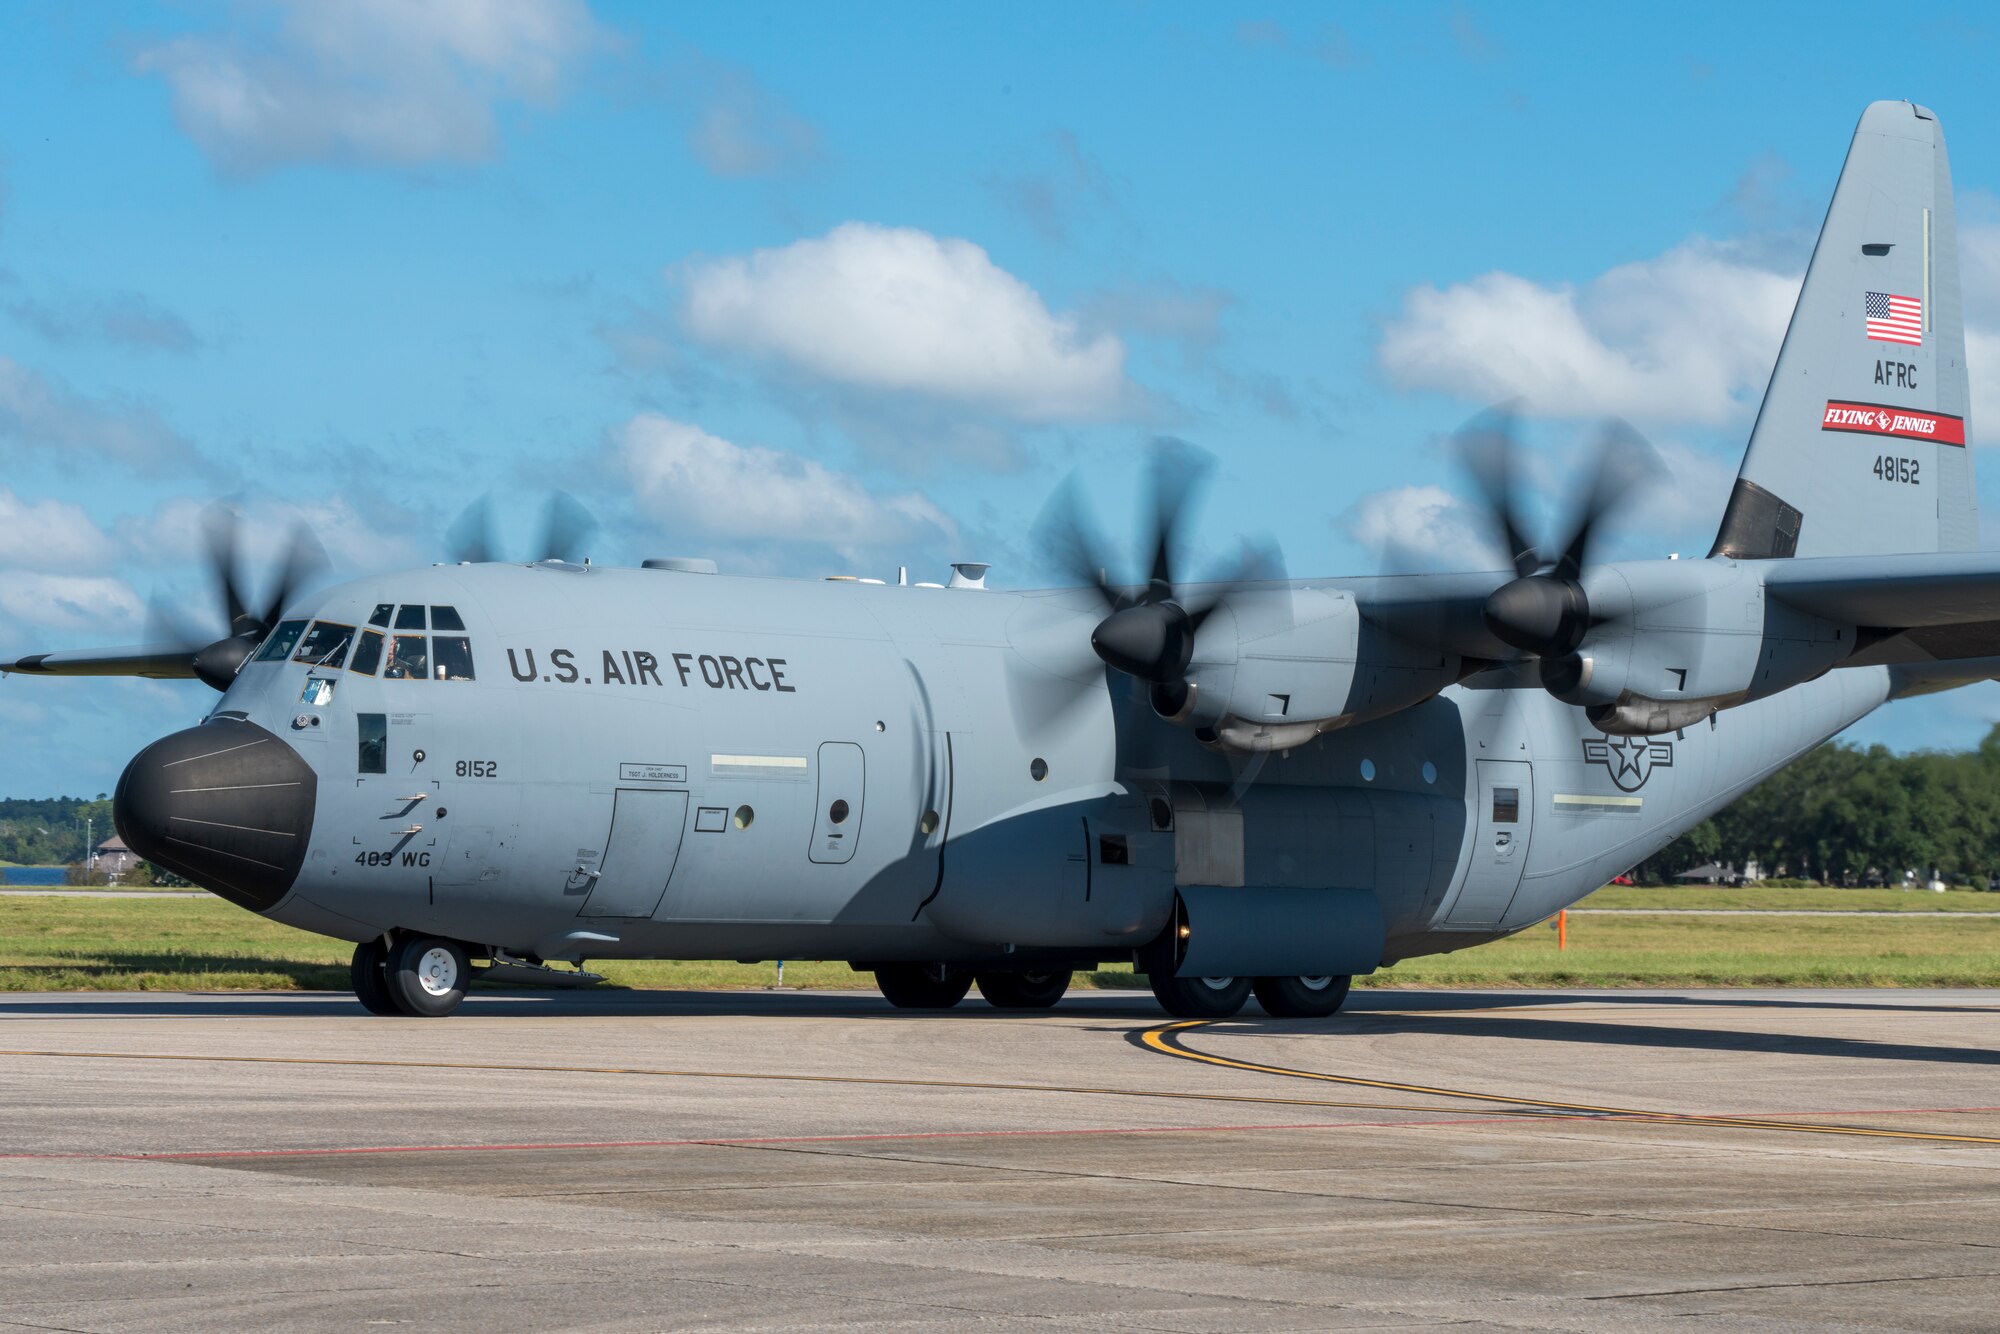 The Air Force Reserve 403rd Wing began evacuating its aircraft due to the impending weather conditions Tropical Sally is forecasted to create Sept. 13, 2020. The 815th Airlift Squadron C-130J "Flying Jennies" and the 53rd Weather Reconnaissance Squadron WC-130J "Hurricane Hunters" relocated to Joint Base San Antonio and Ellington Airport, Texas. The 53rd WRS will continue to fly data collection missions to support the National Hurricane Center from Ellington.